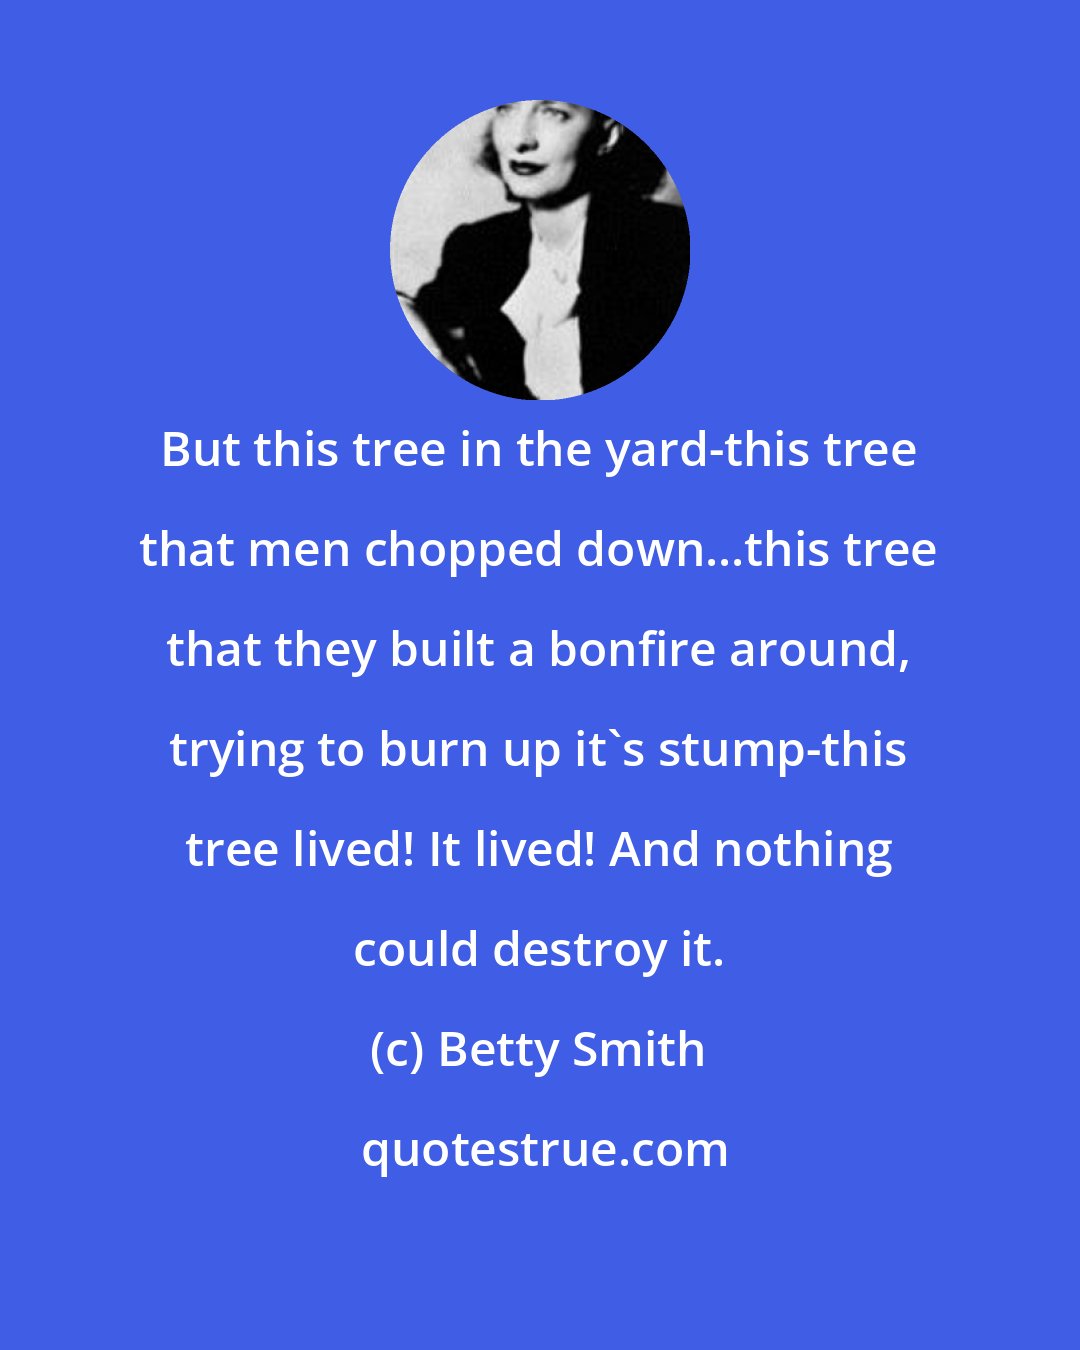 Betty Smith: But this tree in the yard-this tree that men chopped down...this tree that they built a bonfire around, trying to burn up it's stump-this tree lived! It lived! And nothing could destroy it.